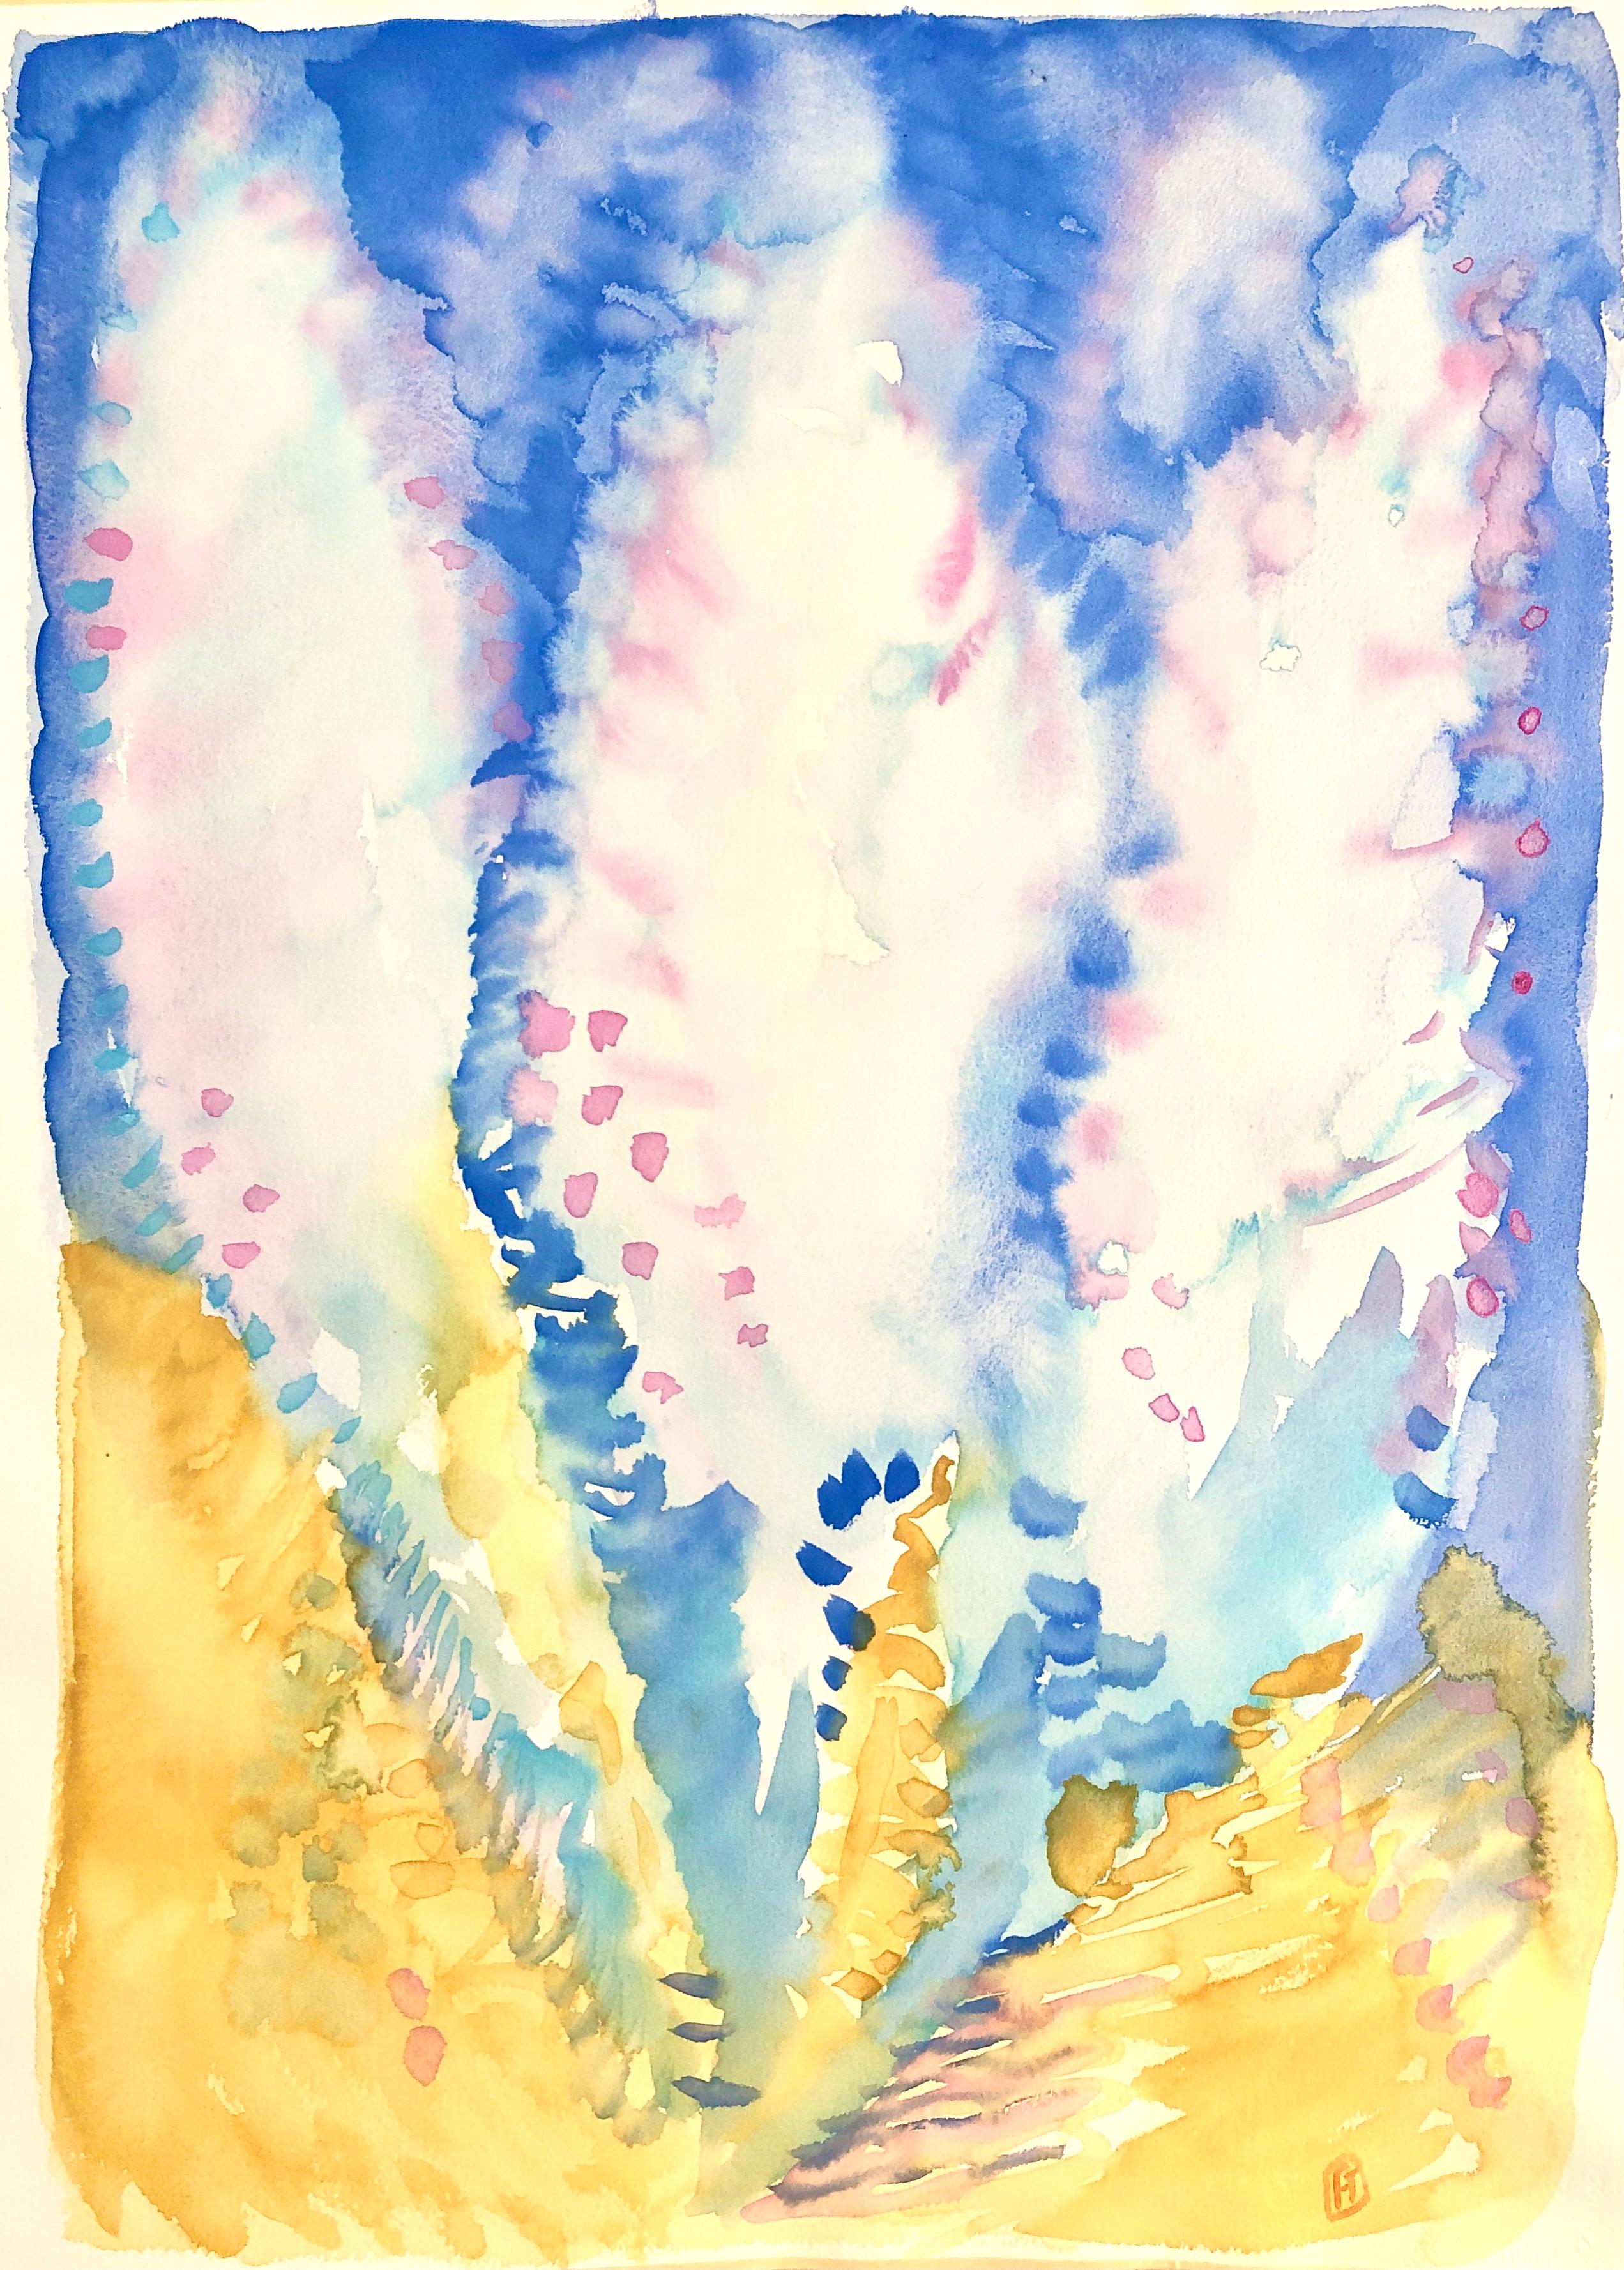 "DREAM 1", watercolor, abstract flowers, cypresses, feathers, lilac, gold, blue